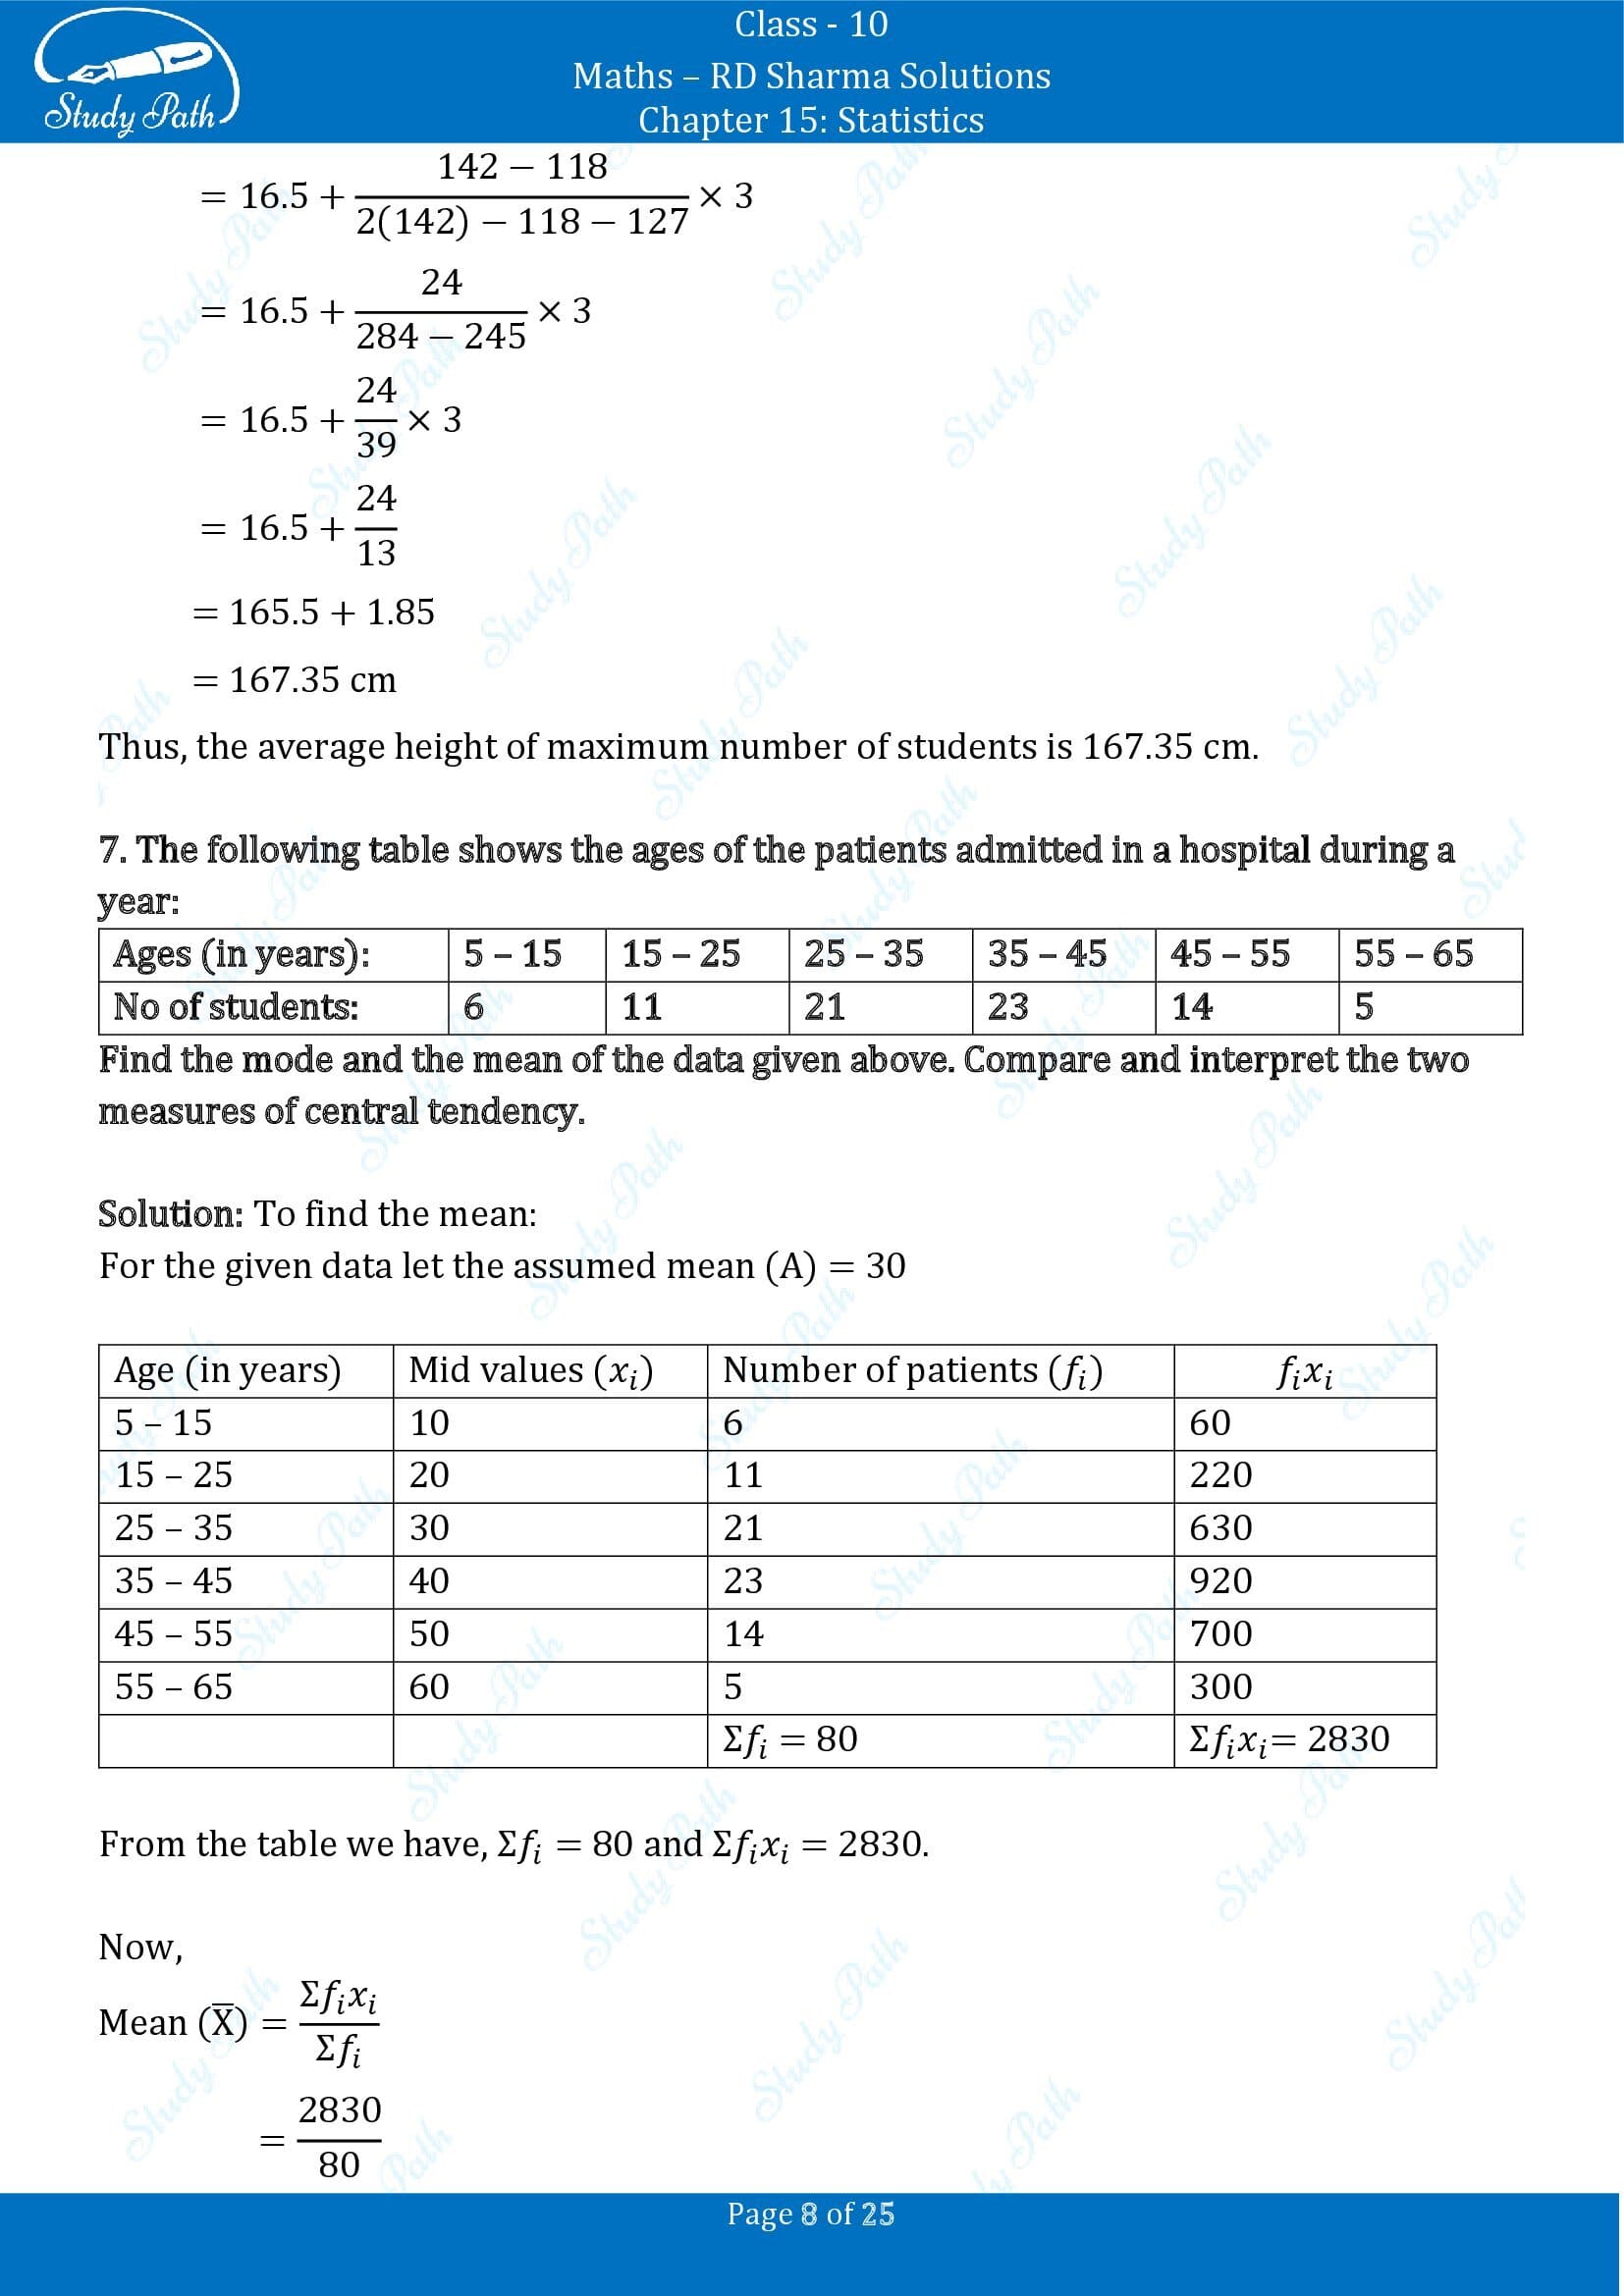 RD Sharma Solutions Class 10 Chapter 15 Statistics Exercise 15.5 00008